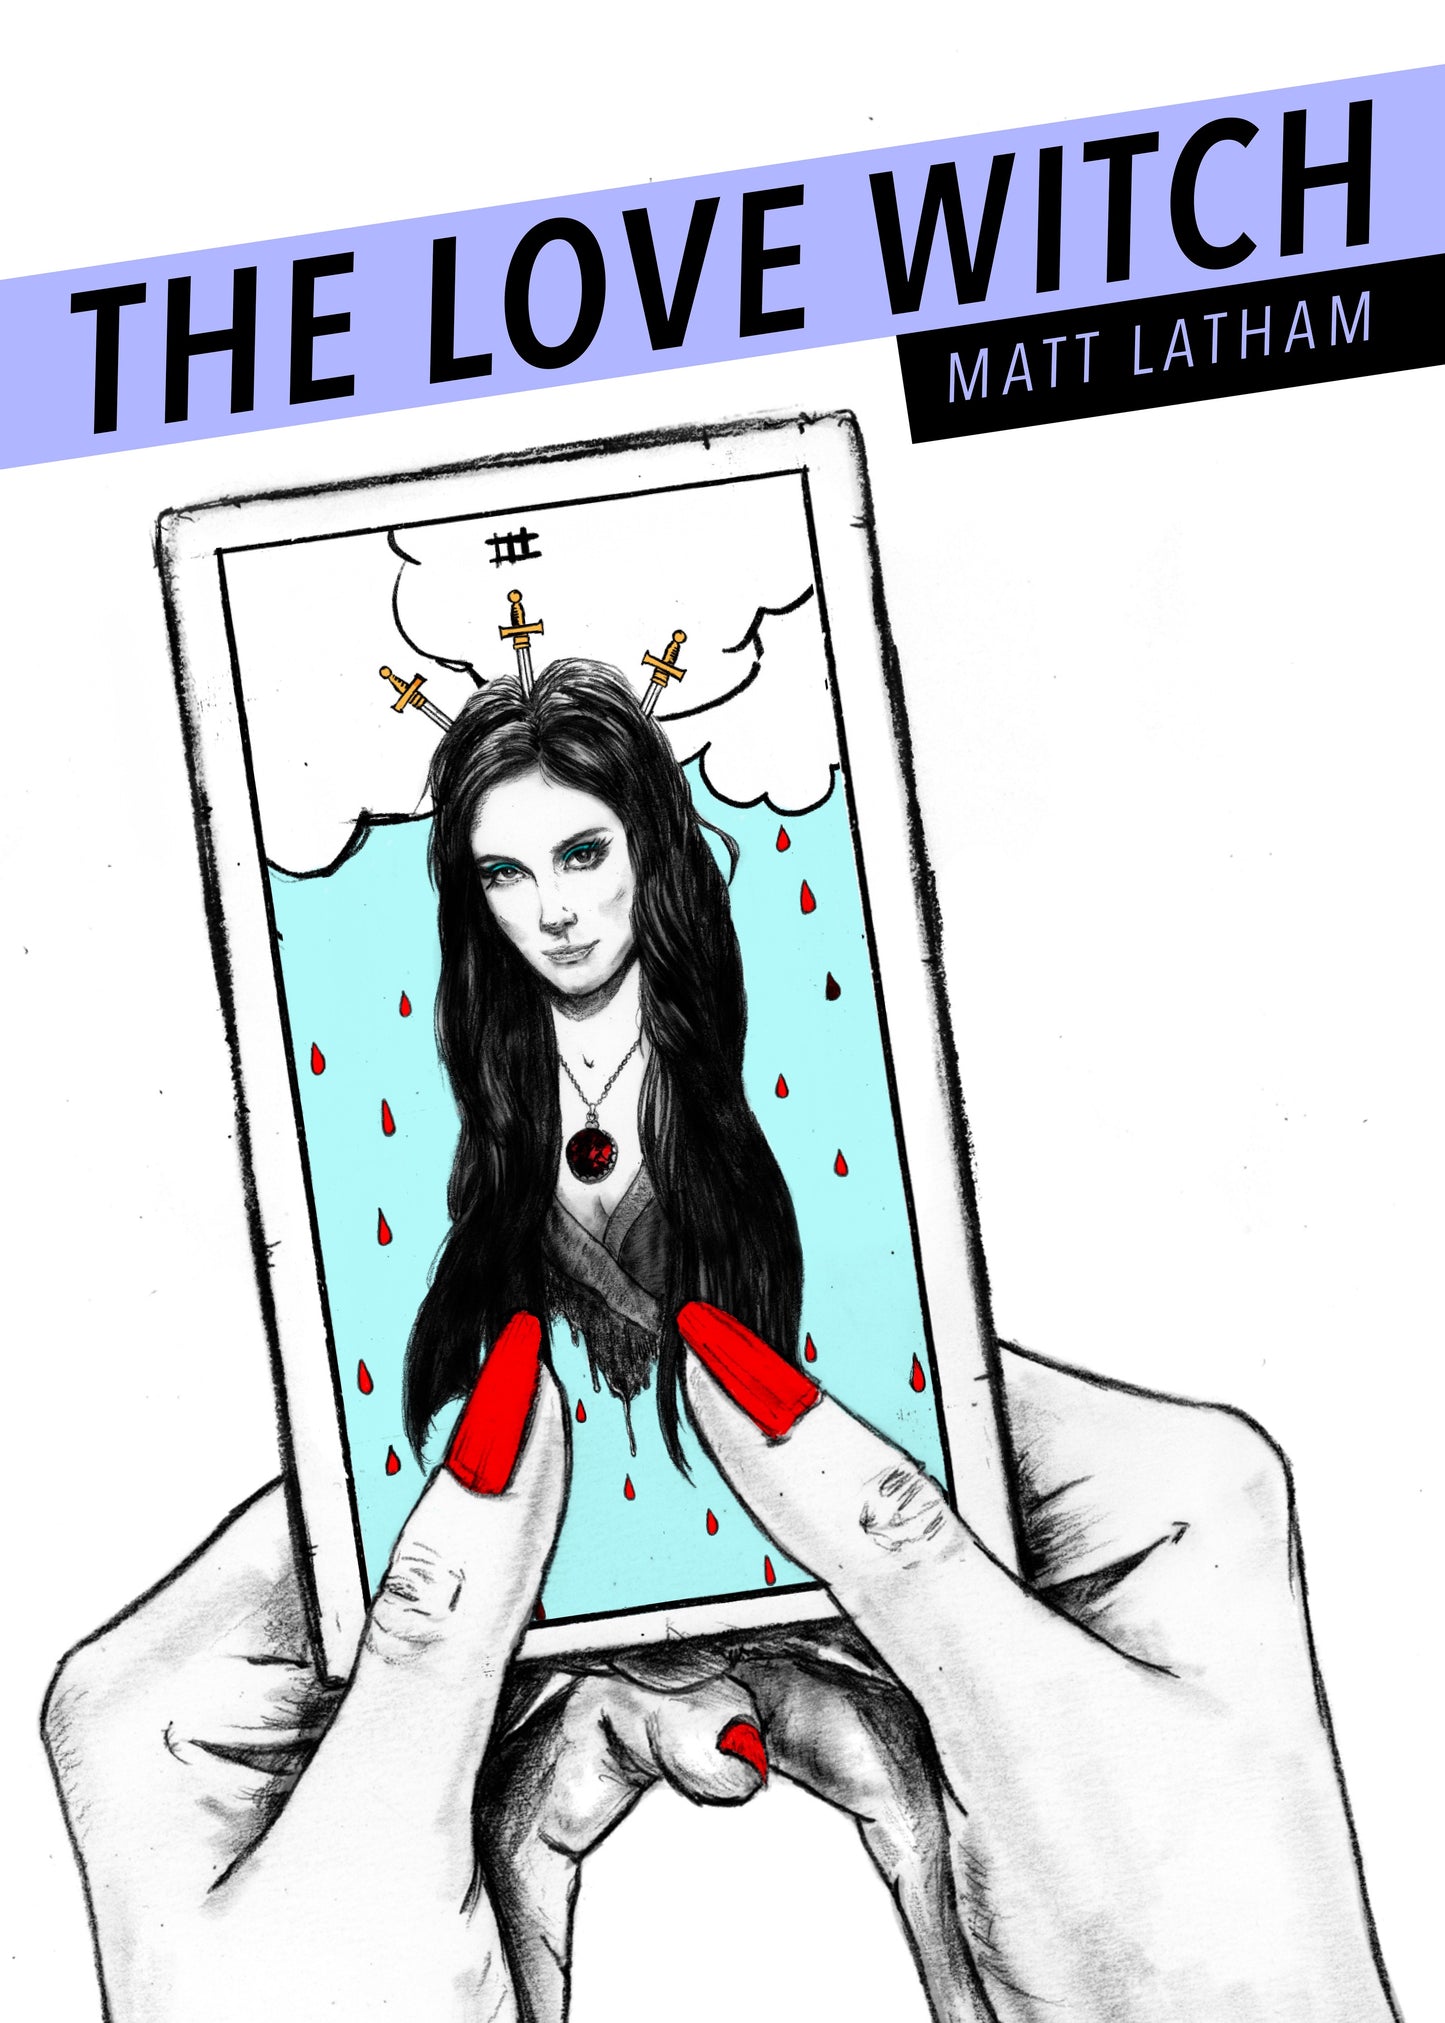 Original book cover art for DieDieBooks' The Love Witch by Matt Latham